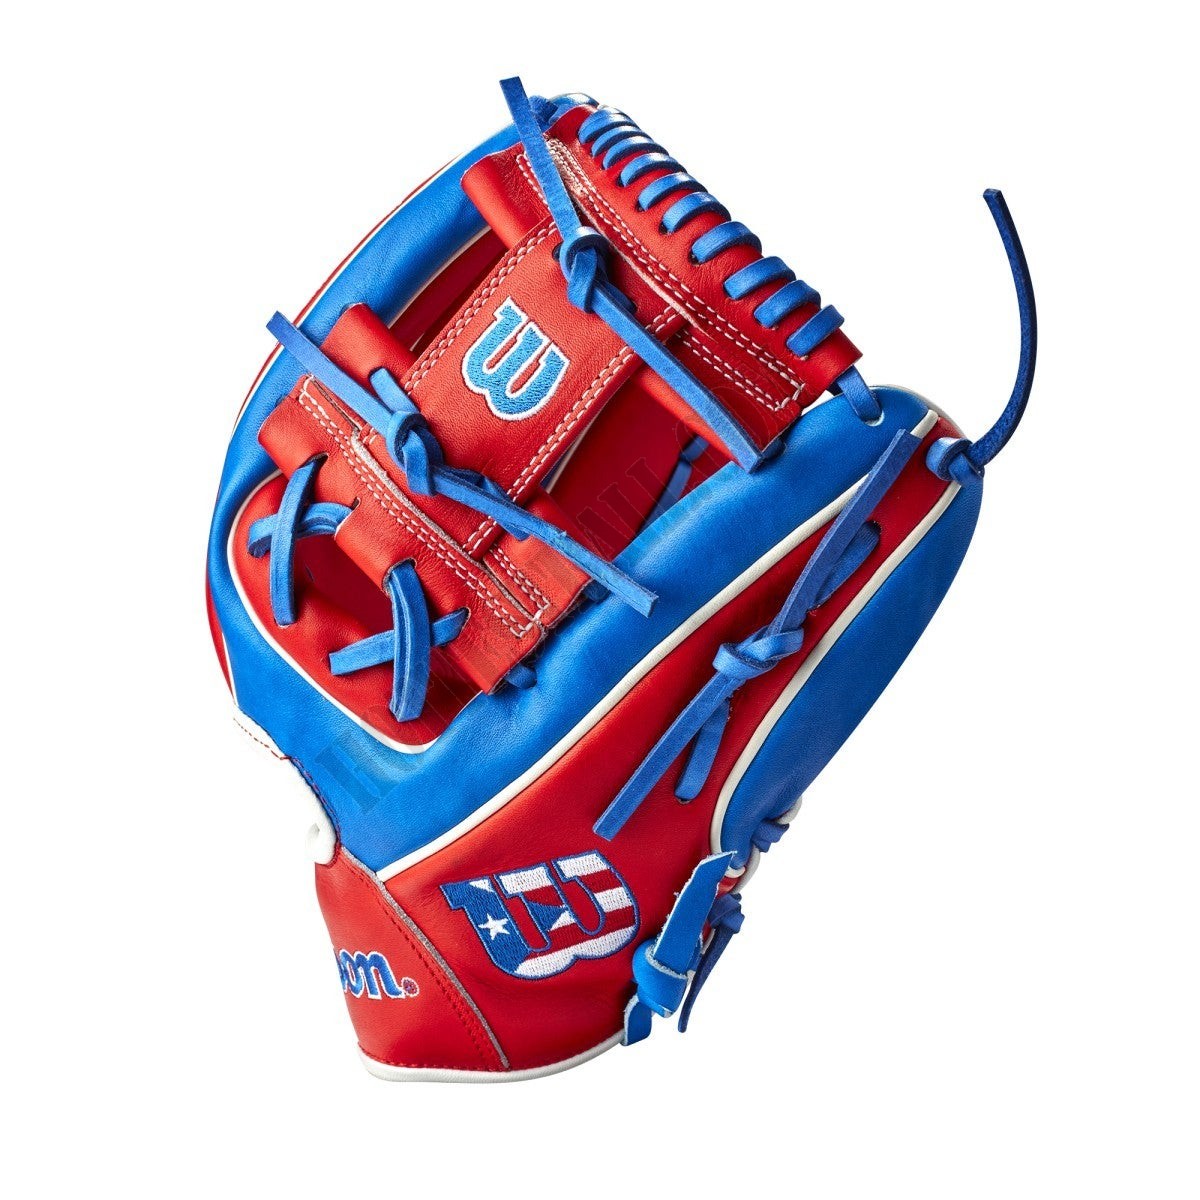 2021 A2000 1786 Puerto Rico 11.5" Infield Baseball Glove - Limited Edition ● Wilson Promotions - -3